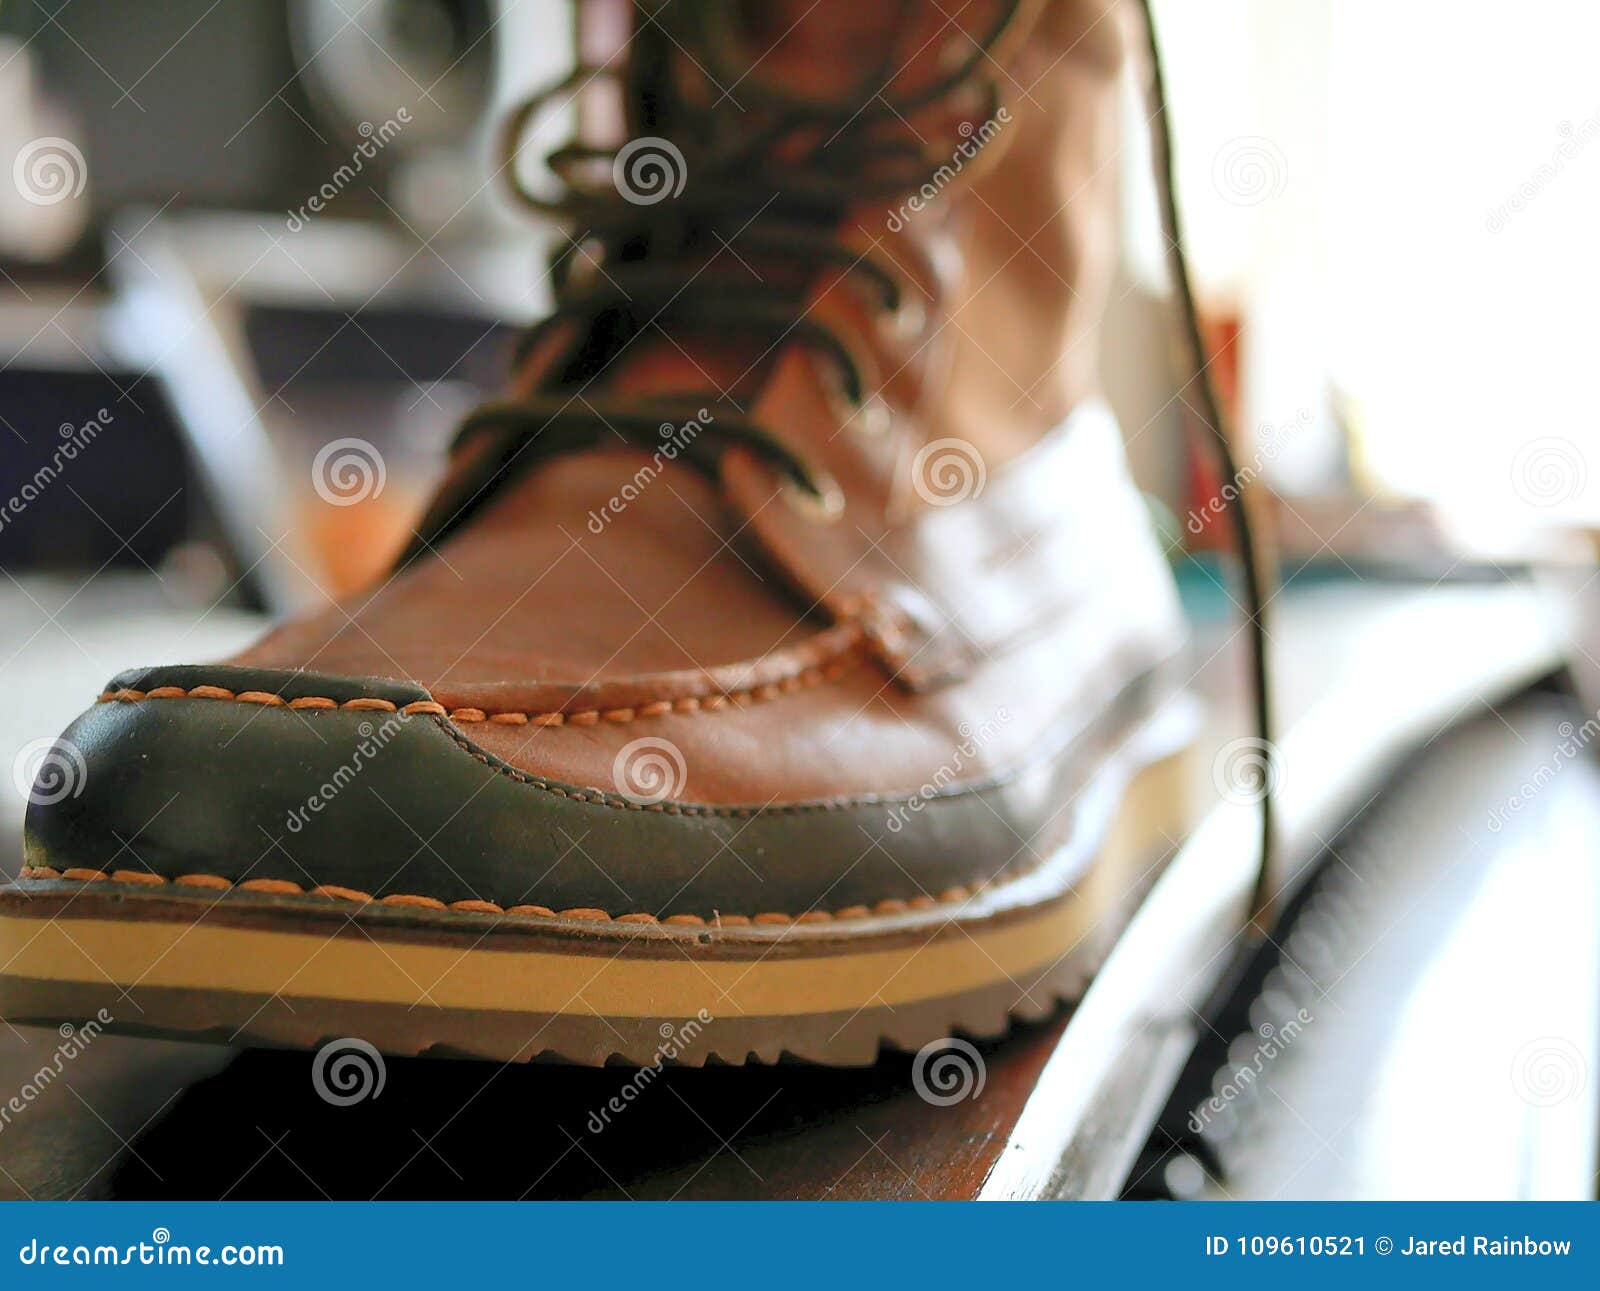 Men`s Leather Work Boot Sitting on Desk. Stock Image - Image of male ...